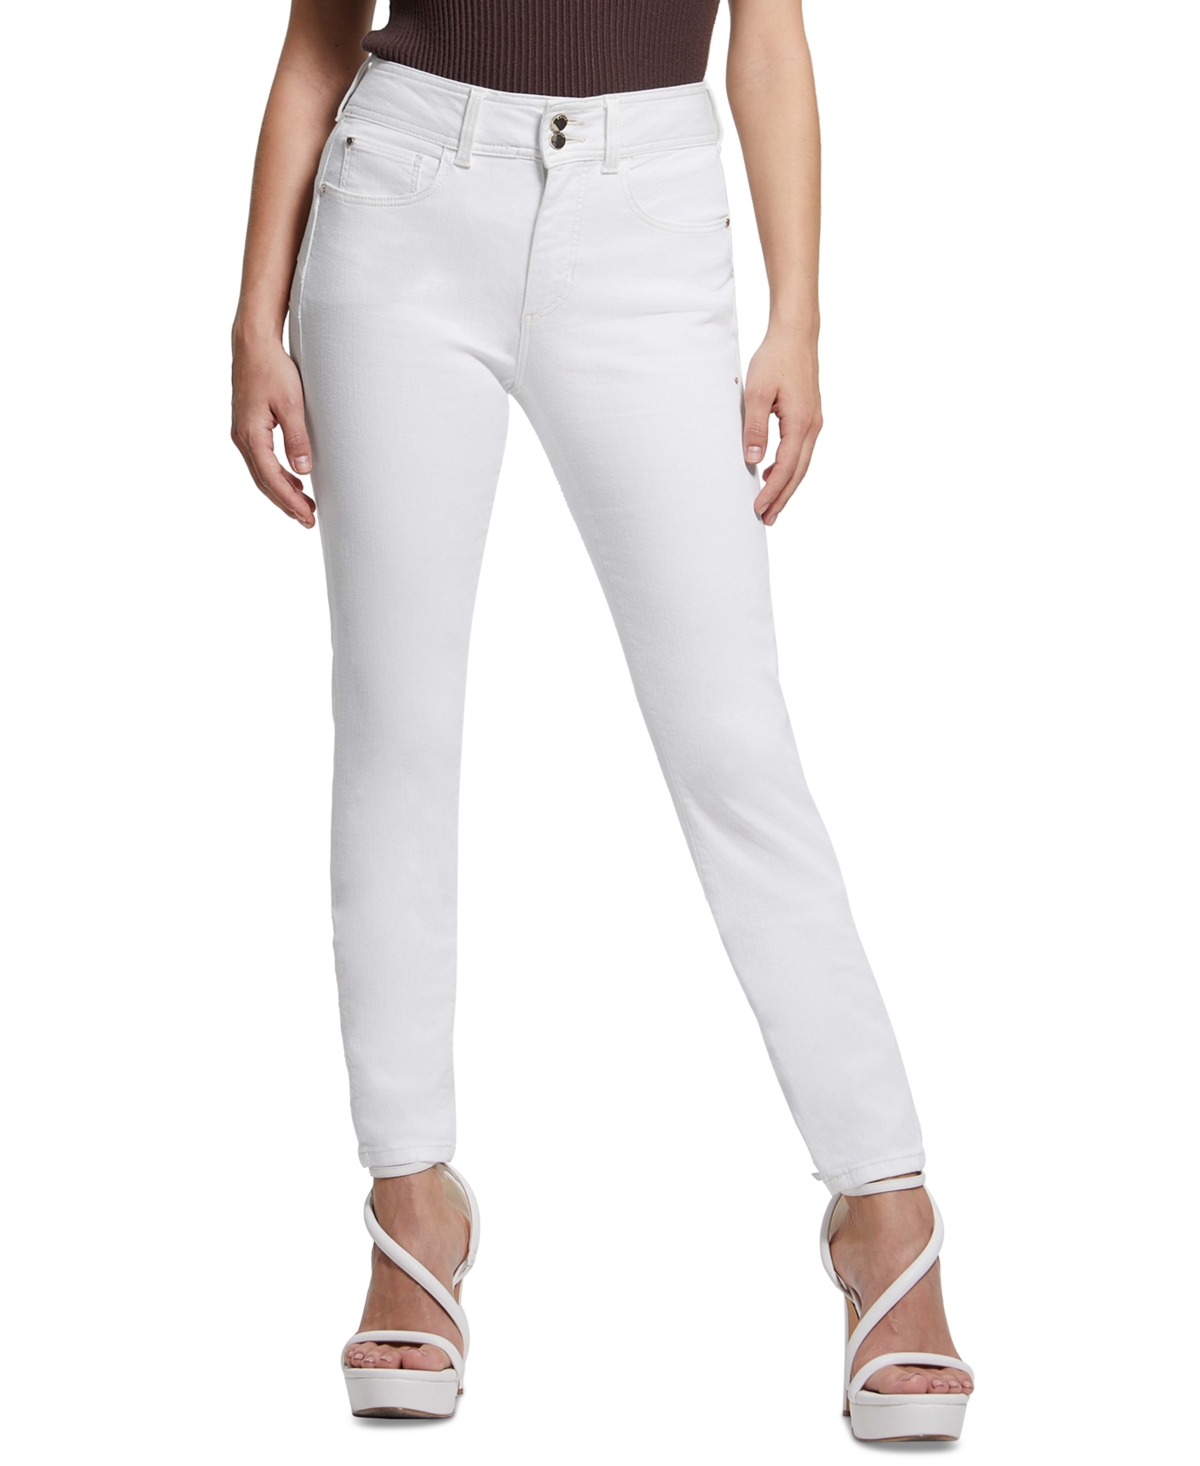 GUESS WOMEN'S SHAPE UP HIGH-RISE SKINNY JEANS